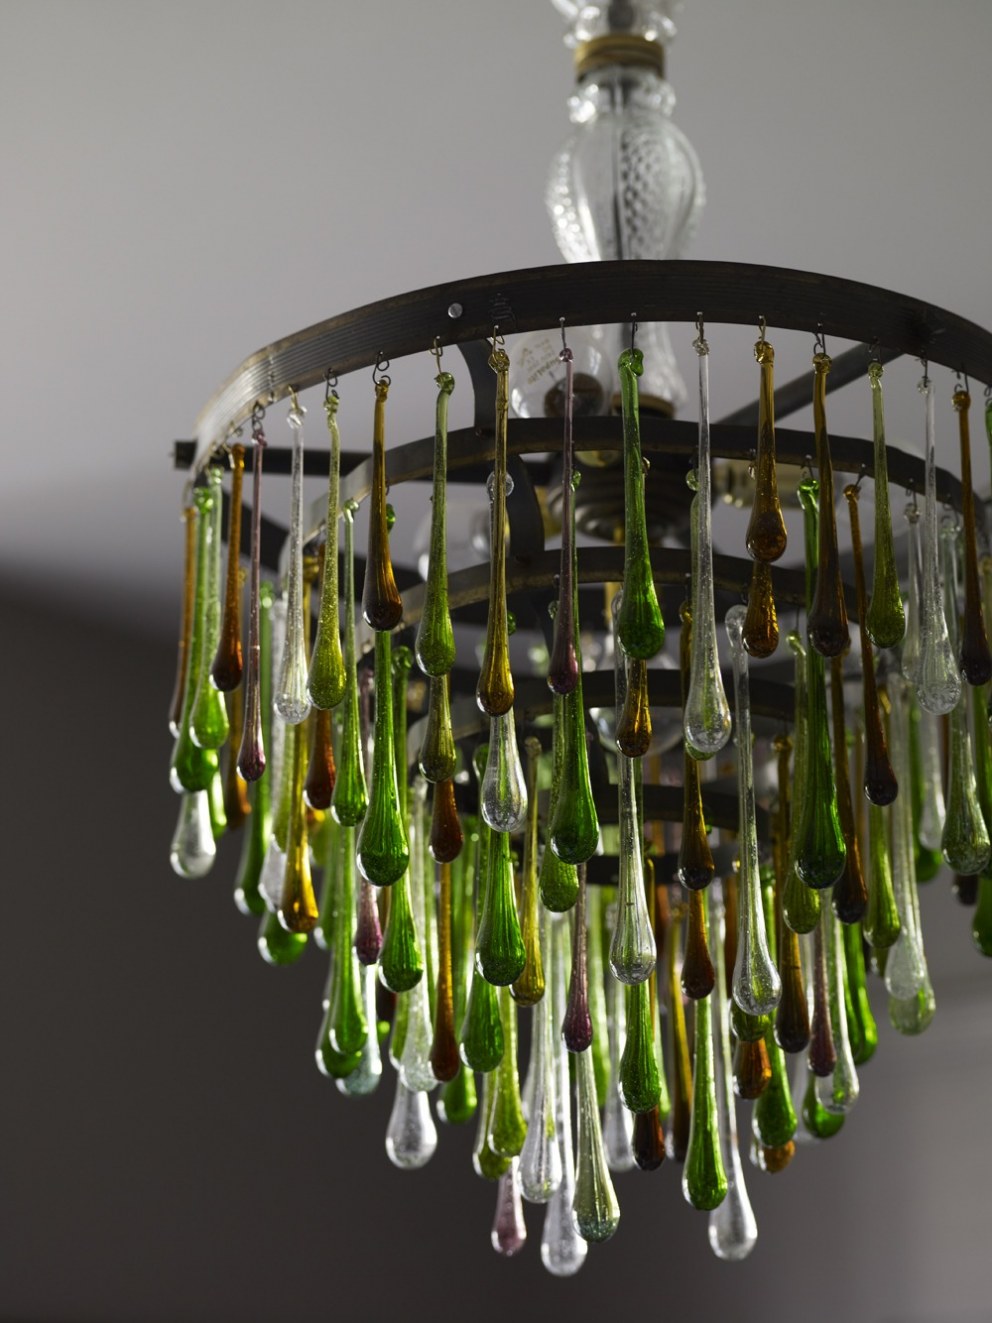 Arts and Crafts home in North London | Chandelier Detail  | Interior Designers